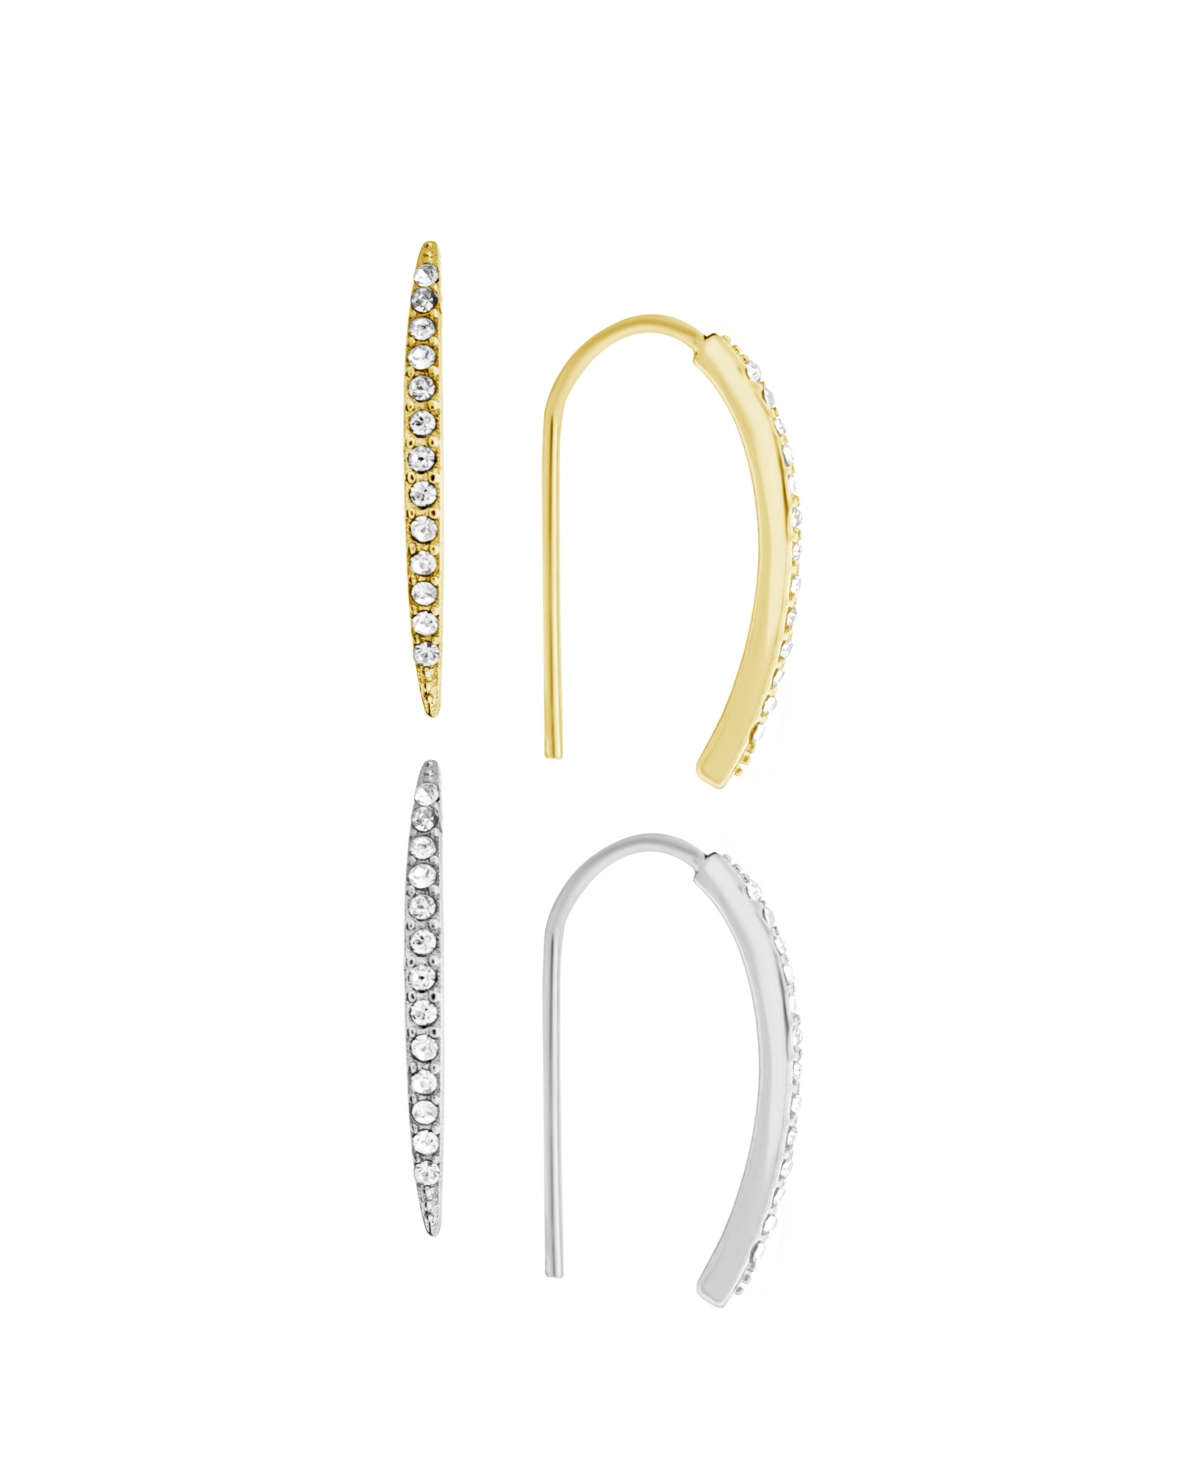 Crystal Duo Threader Earrings in Silver Plate and Gold Plate - Two Tone